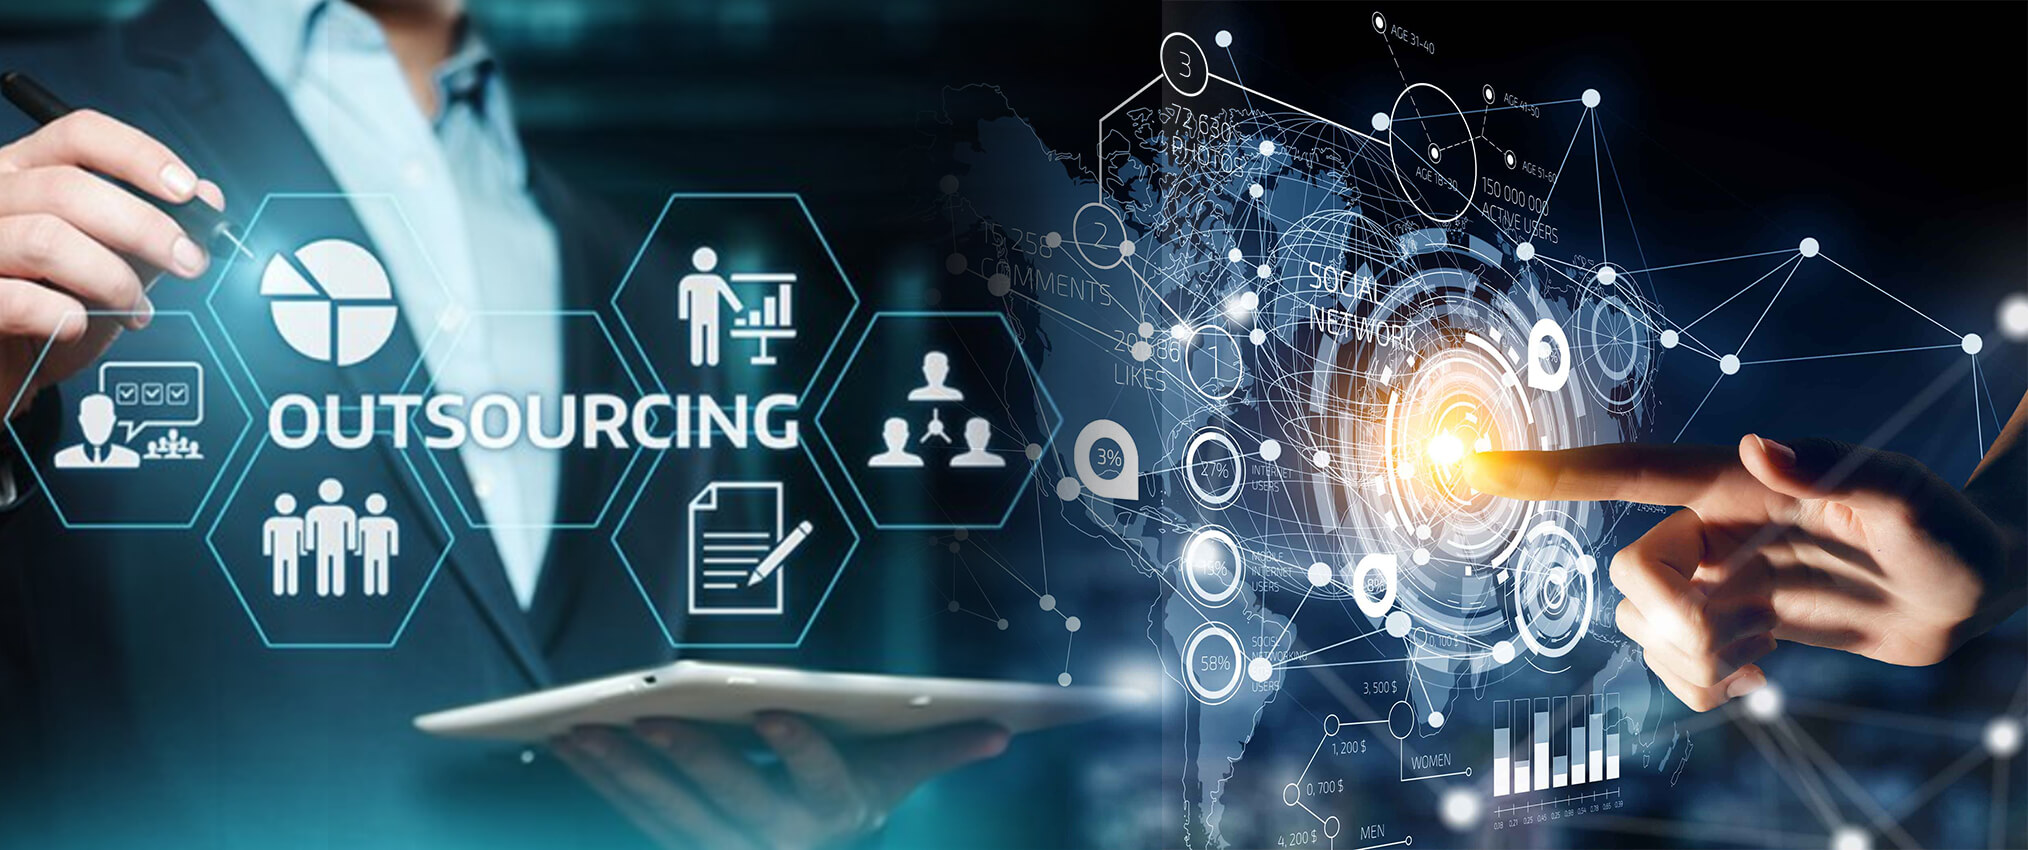 Top 7 Outsourcing Trends That Will Rule in 2022